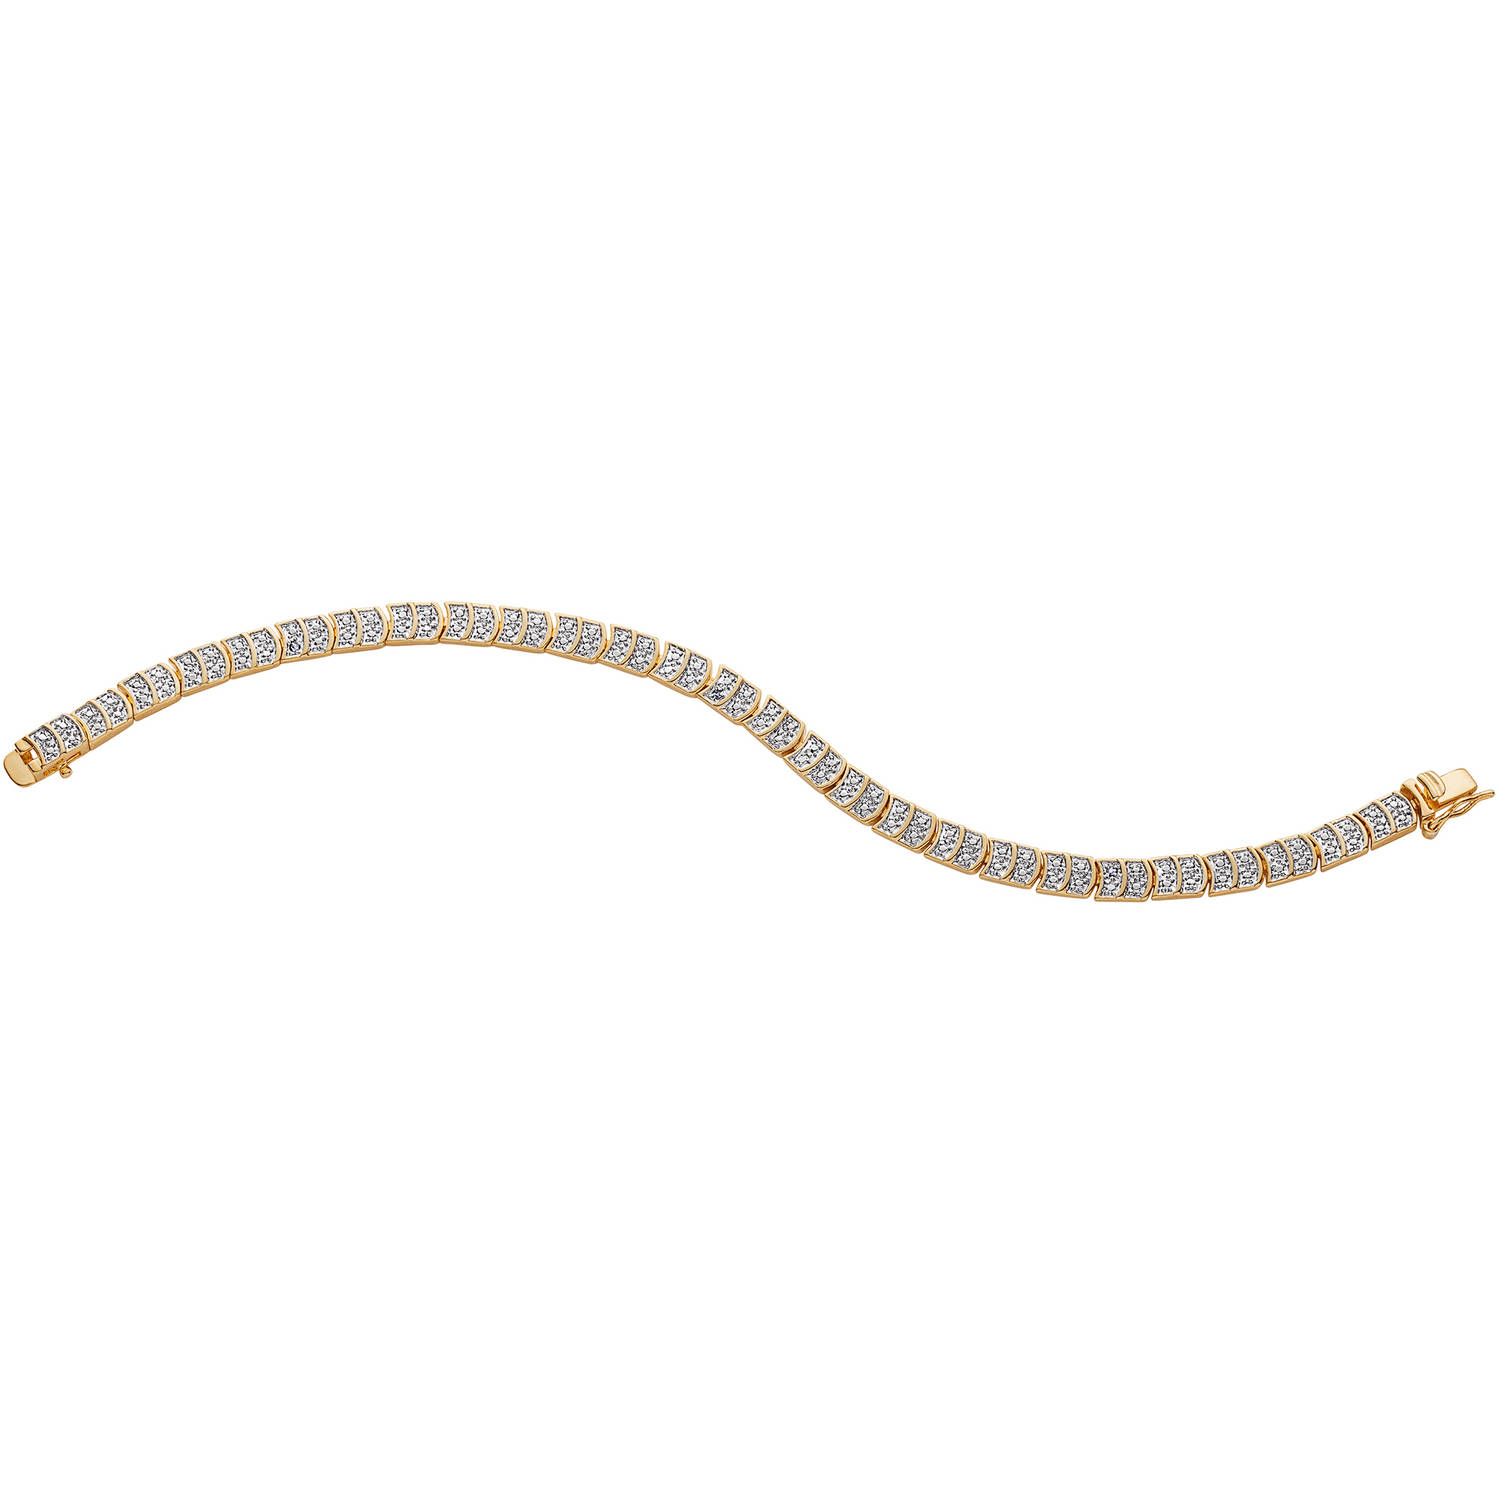 Diamond Accent 14kt Gold-Plated Tennis Bracelet, 8" - image 2 of 2